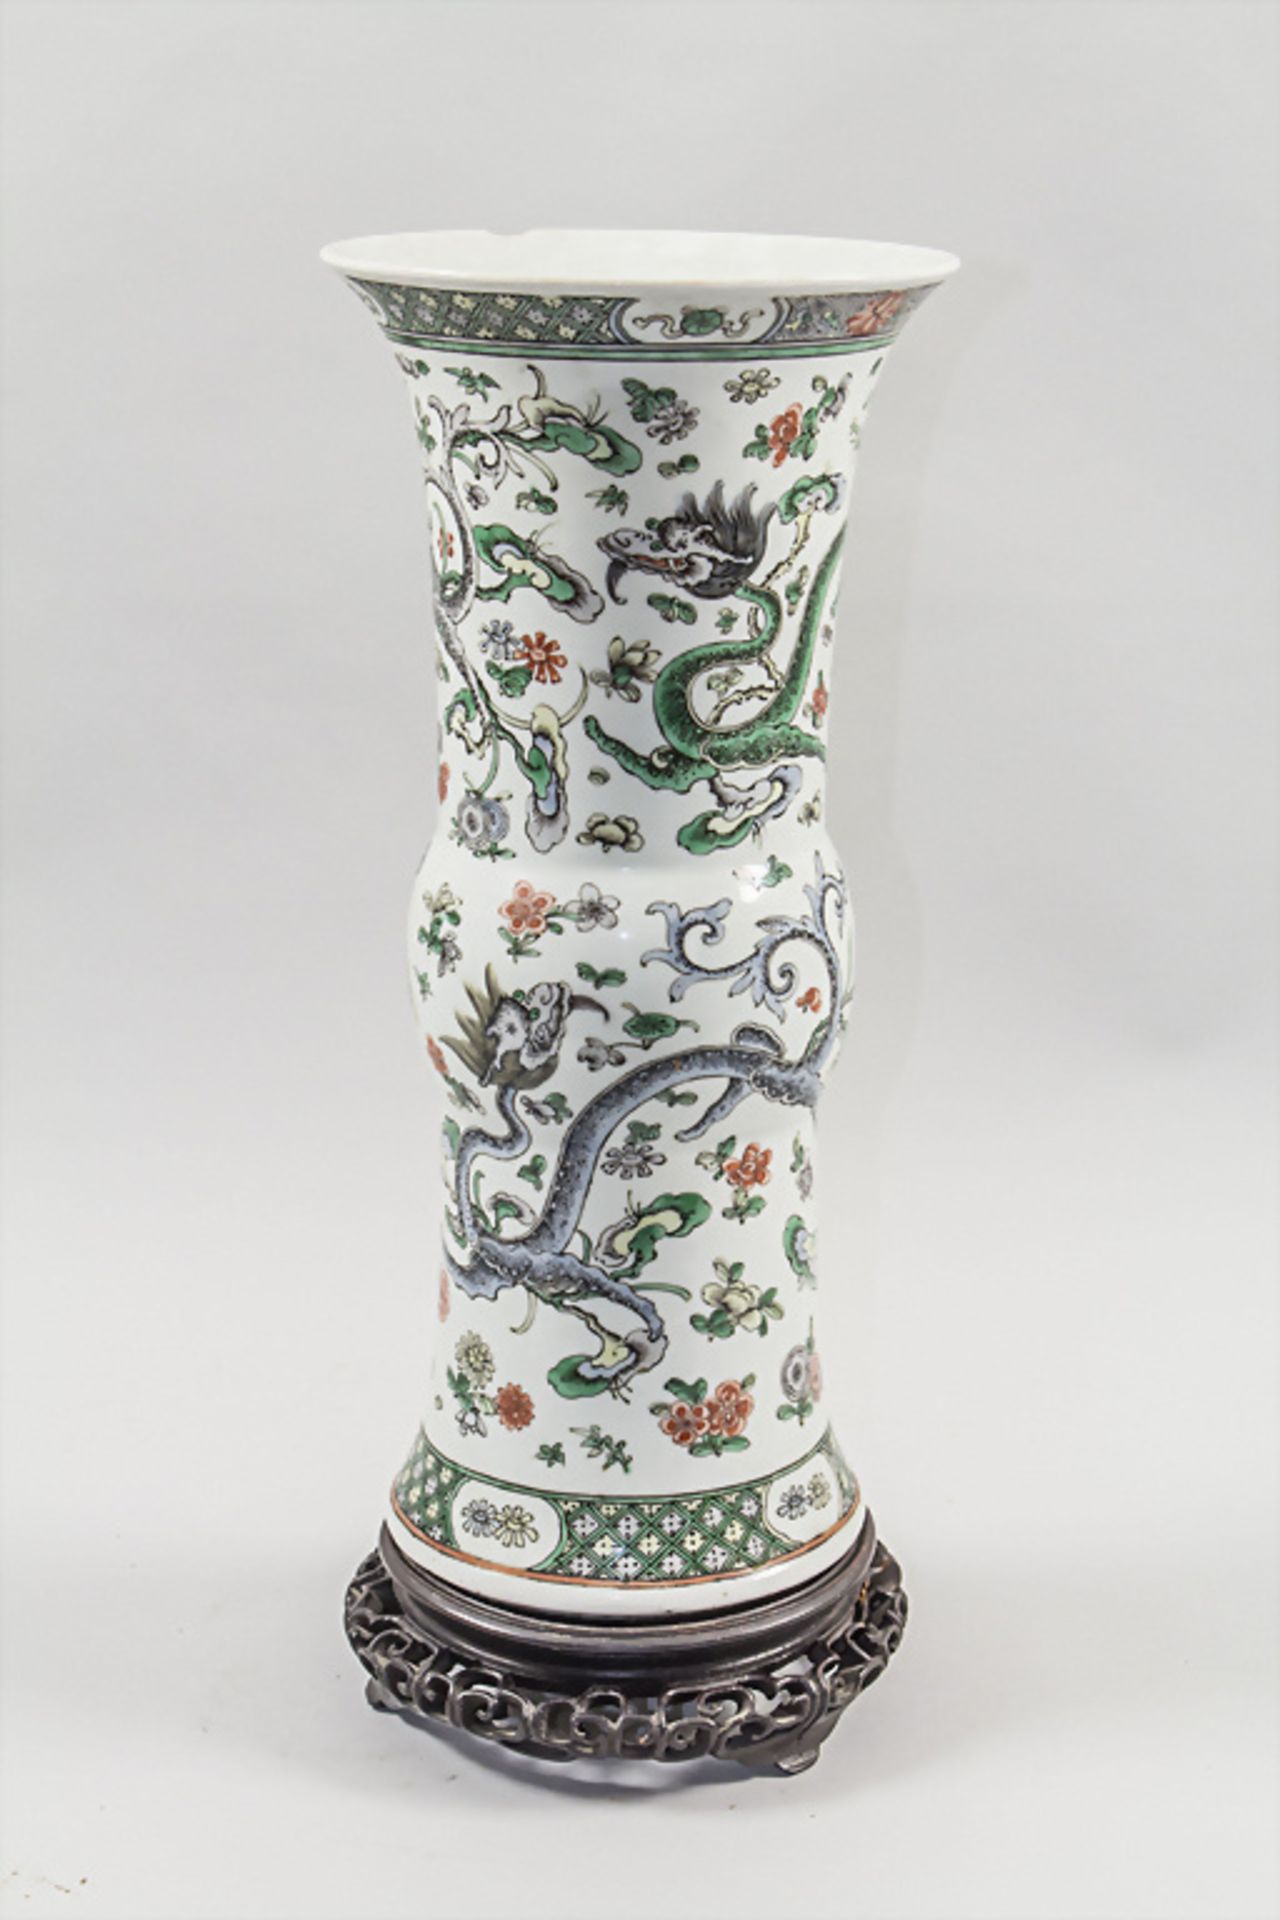 Vase mit Holzstand / A vase with wooden stand, China, Qing-Dynastie (1644-1911), 18./19. Jh. - Image 3 of 7